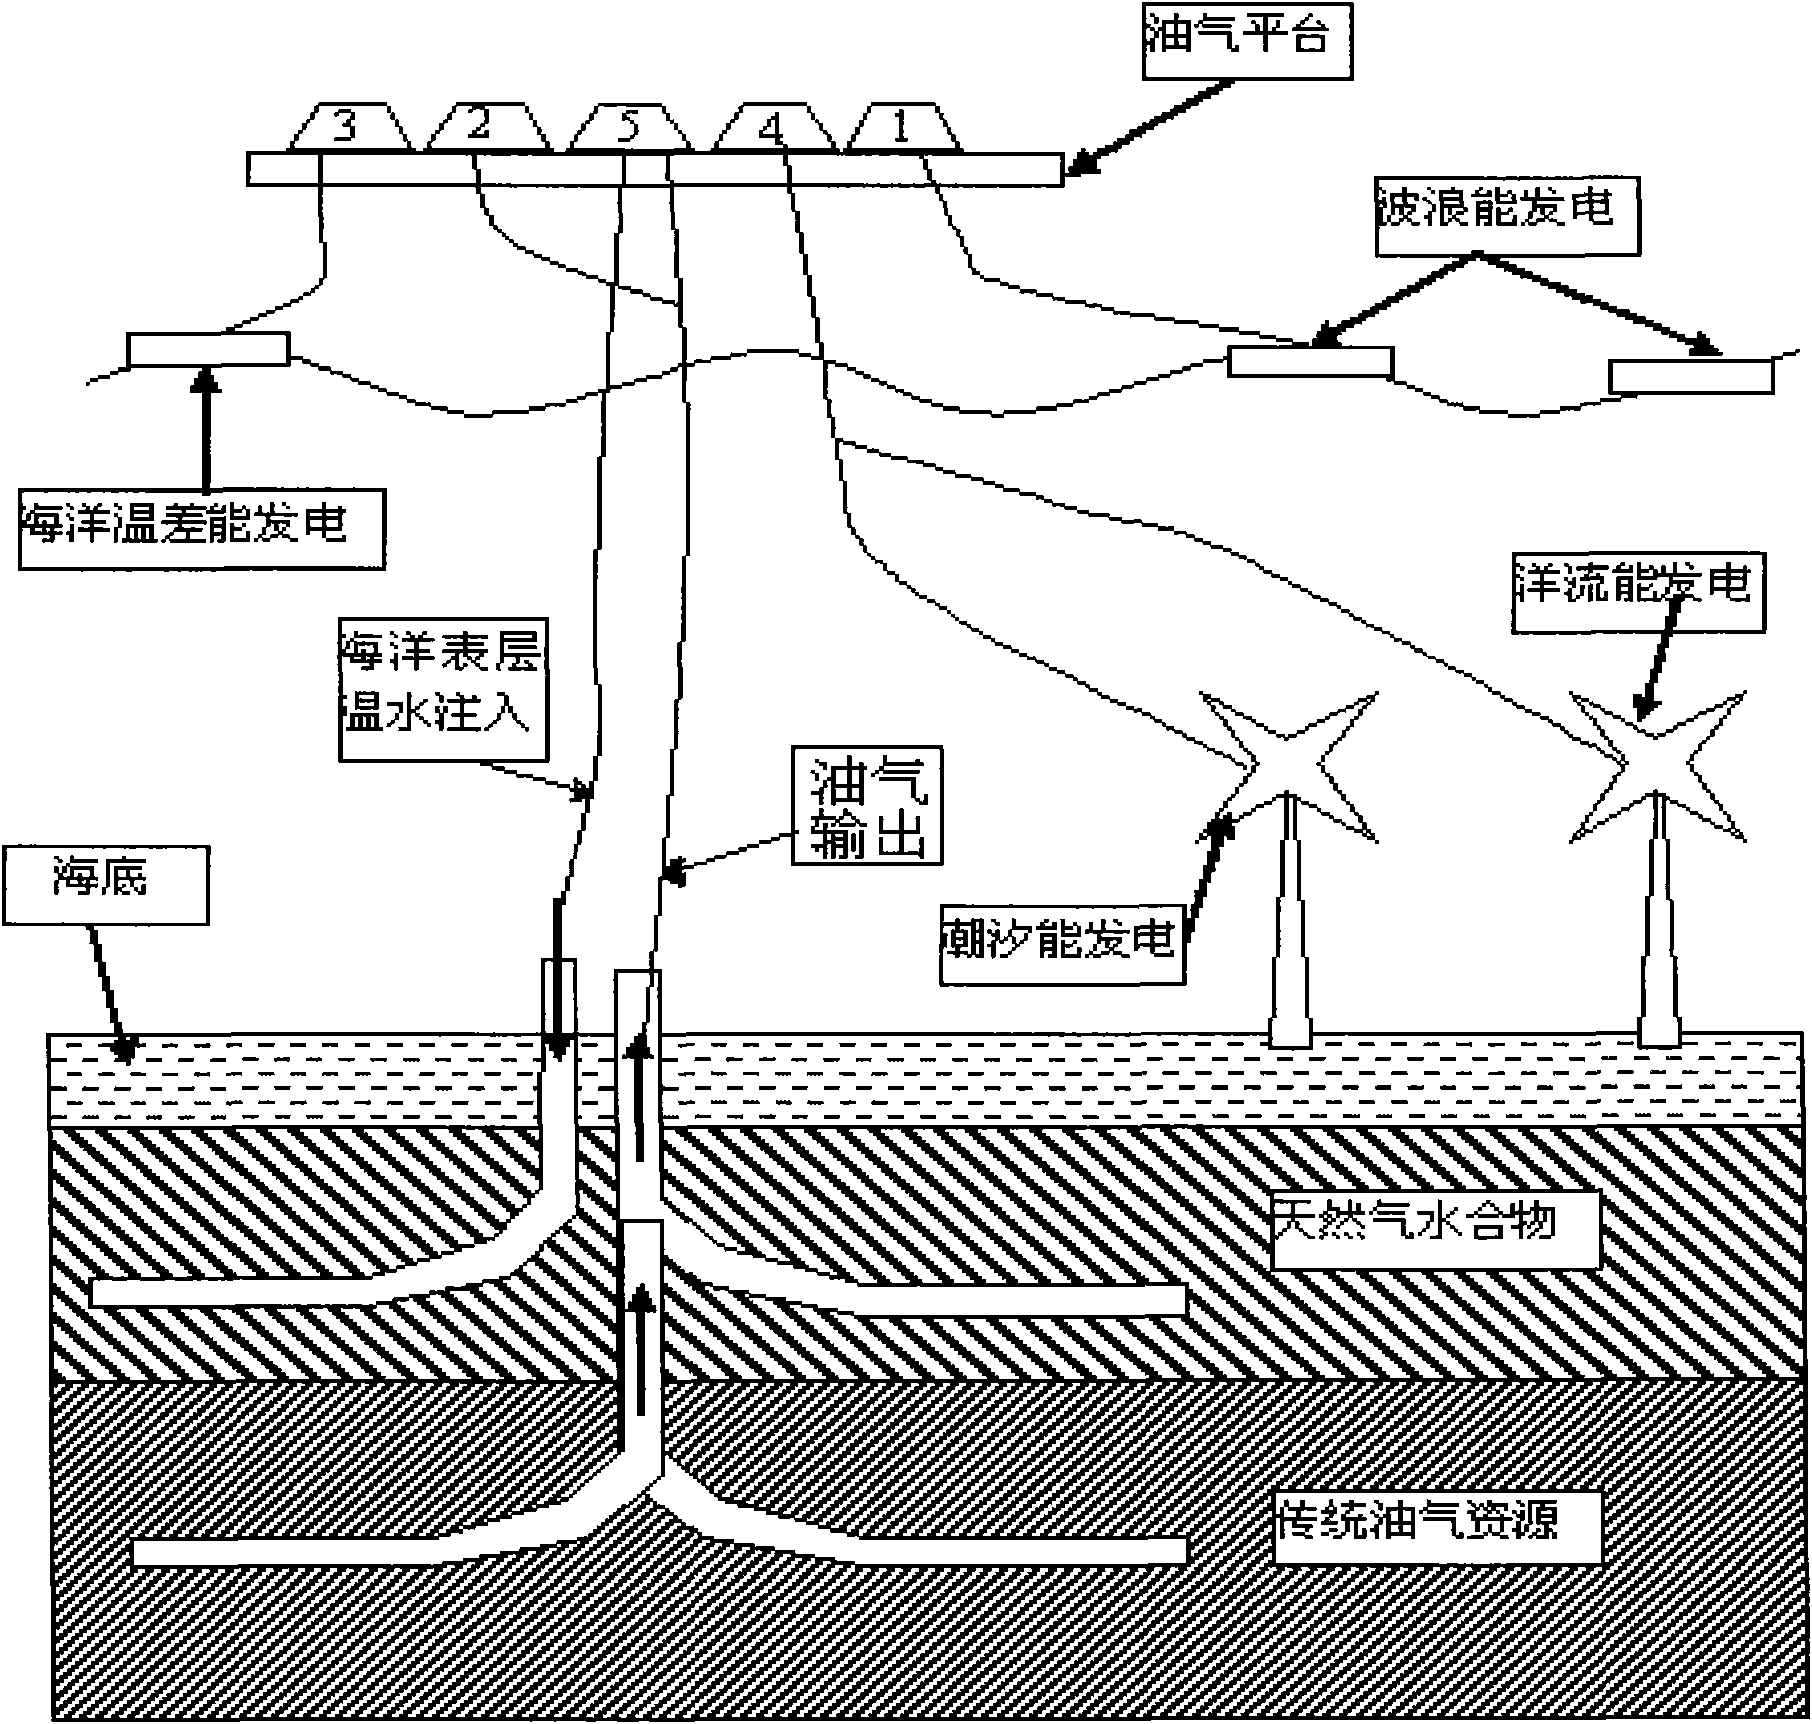 System for integrally exploiting marine energy resource